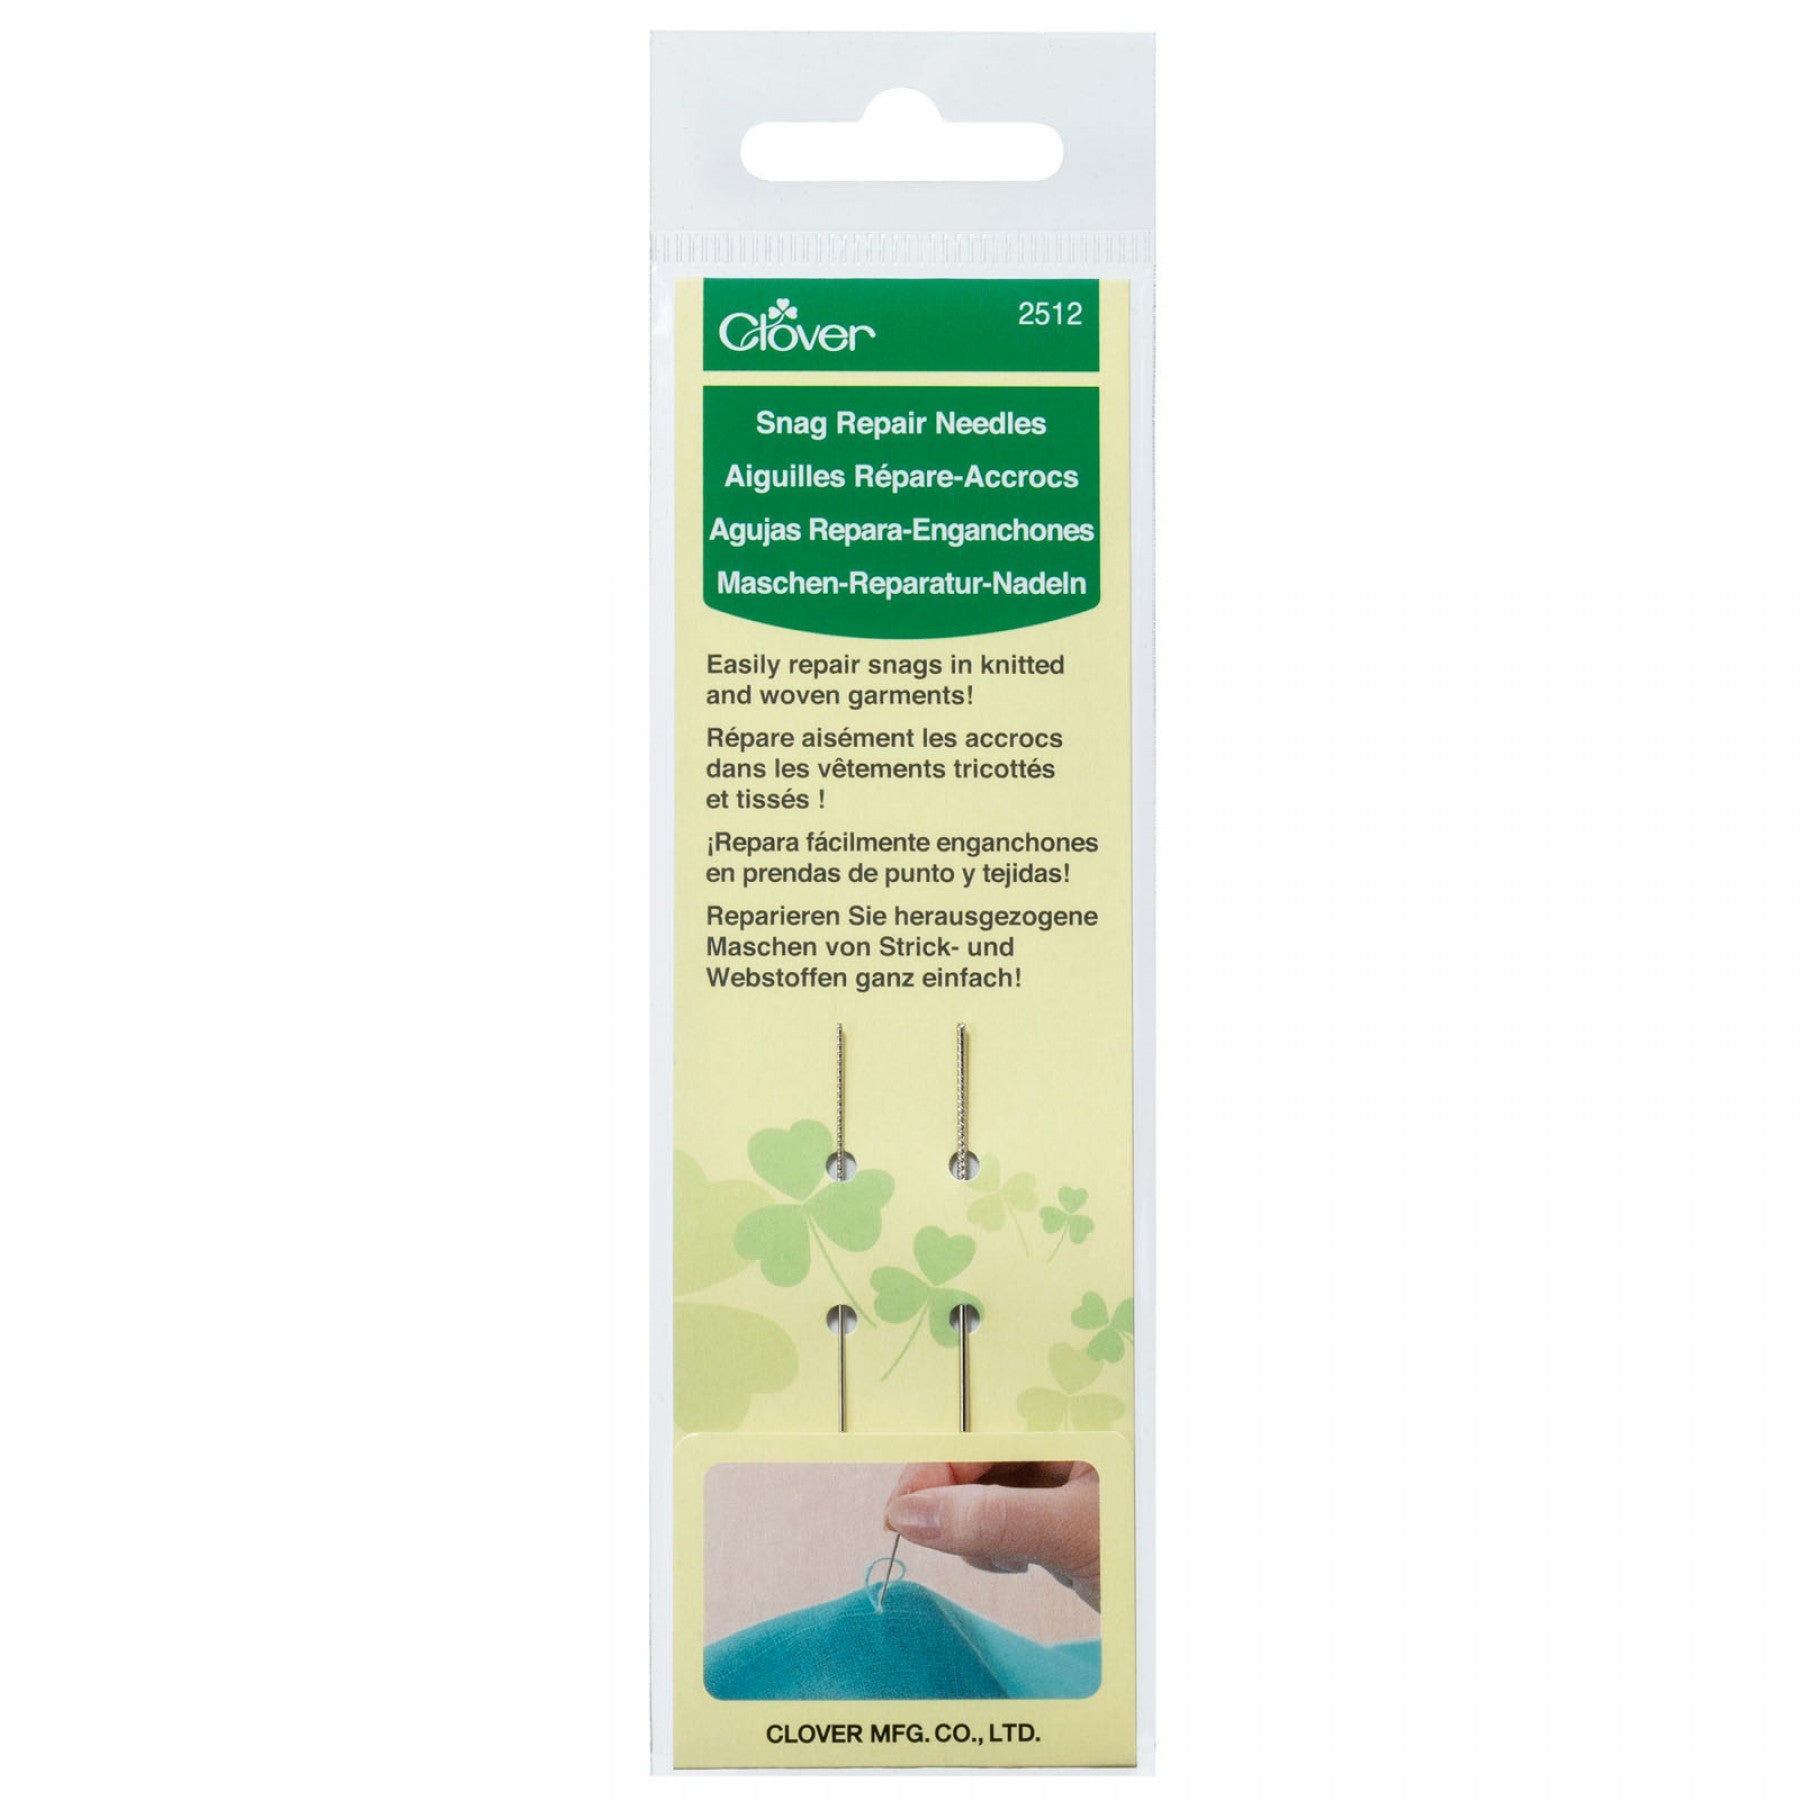 Snag Repair Hand Sewing Needles by Clover®